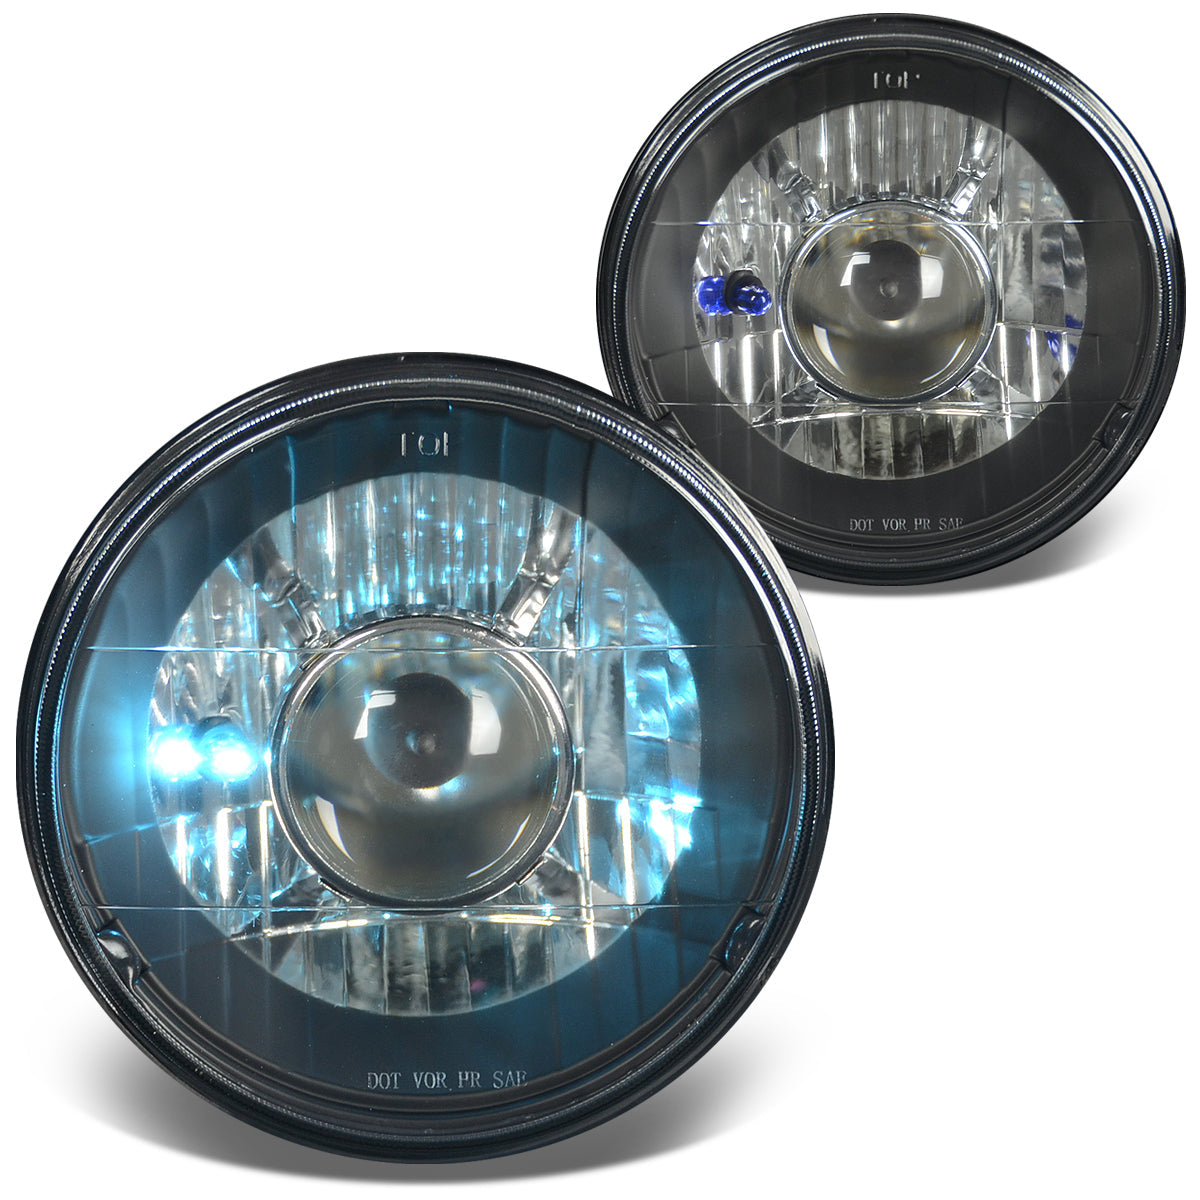 7x7 in. Round Projector Headlights